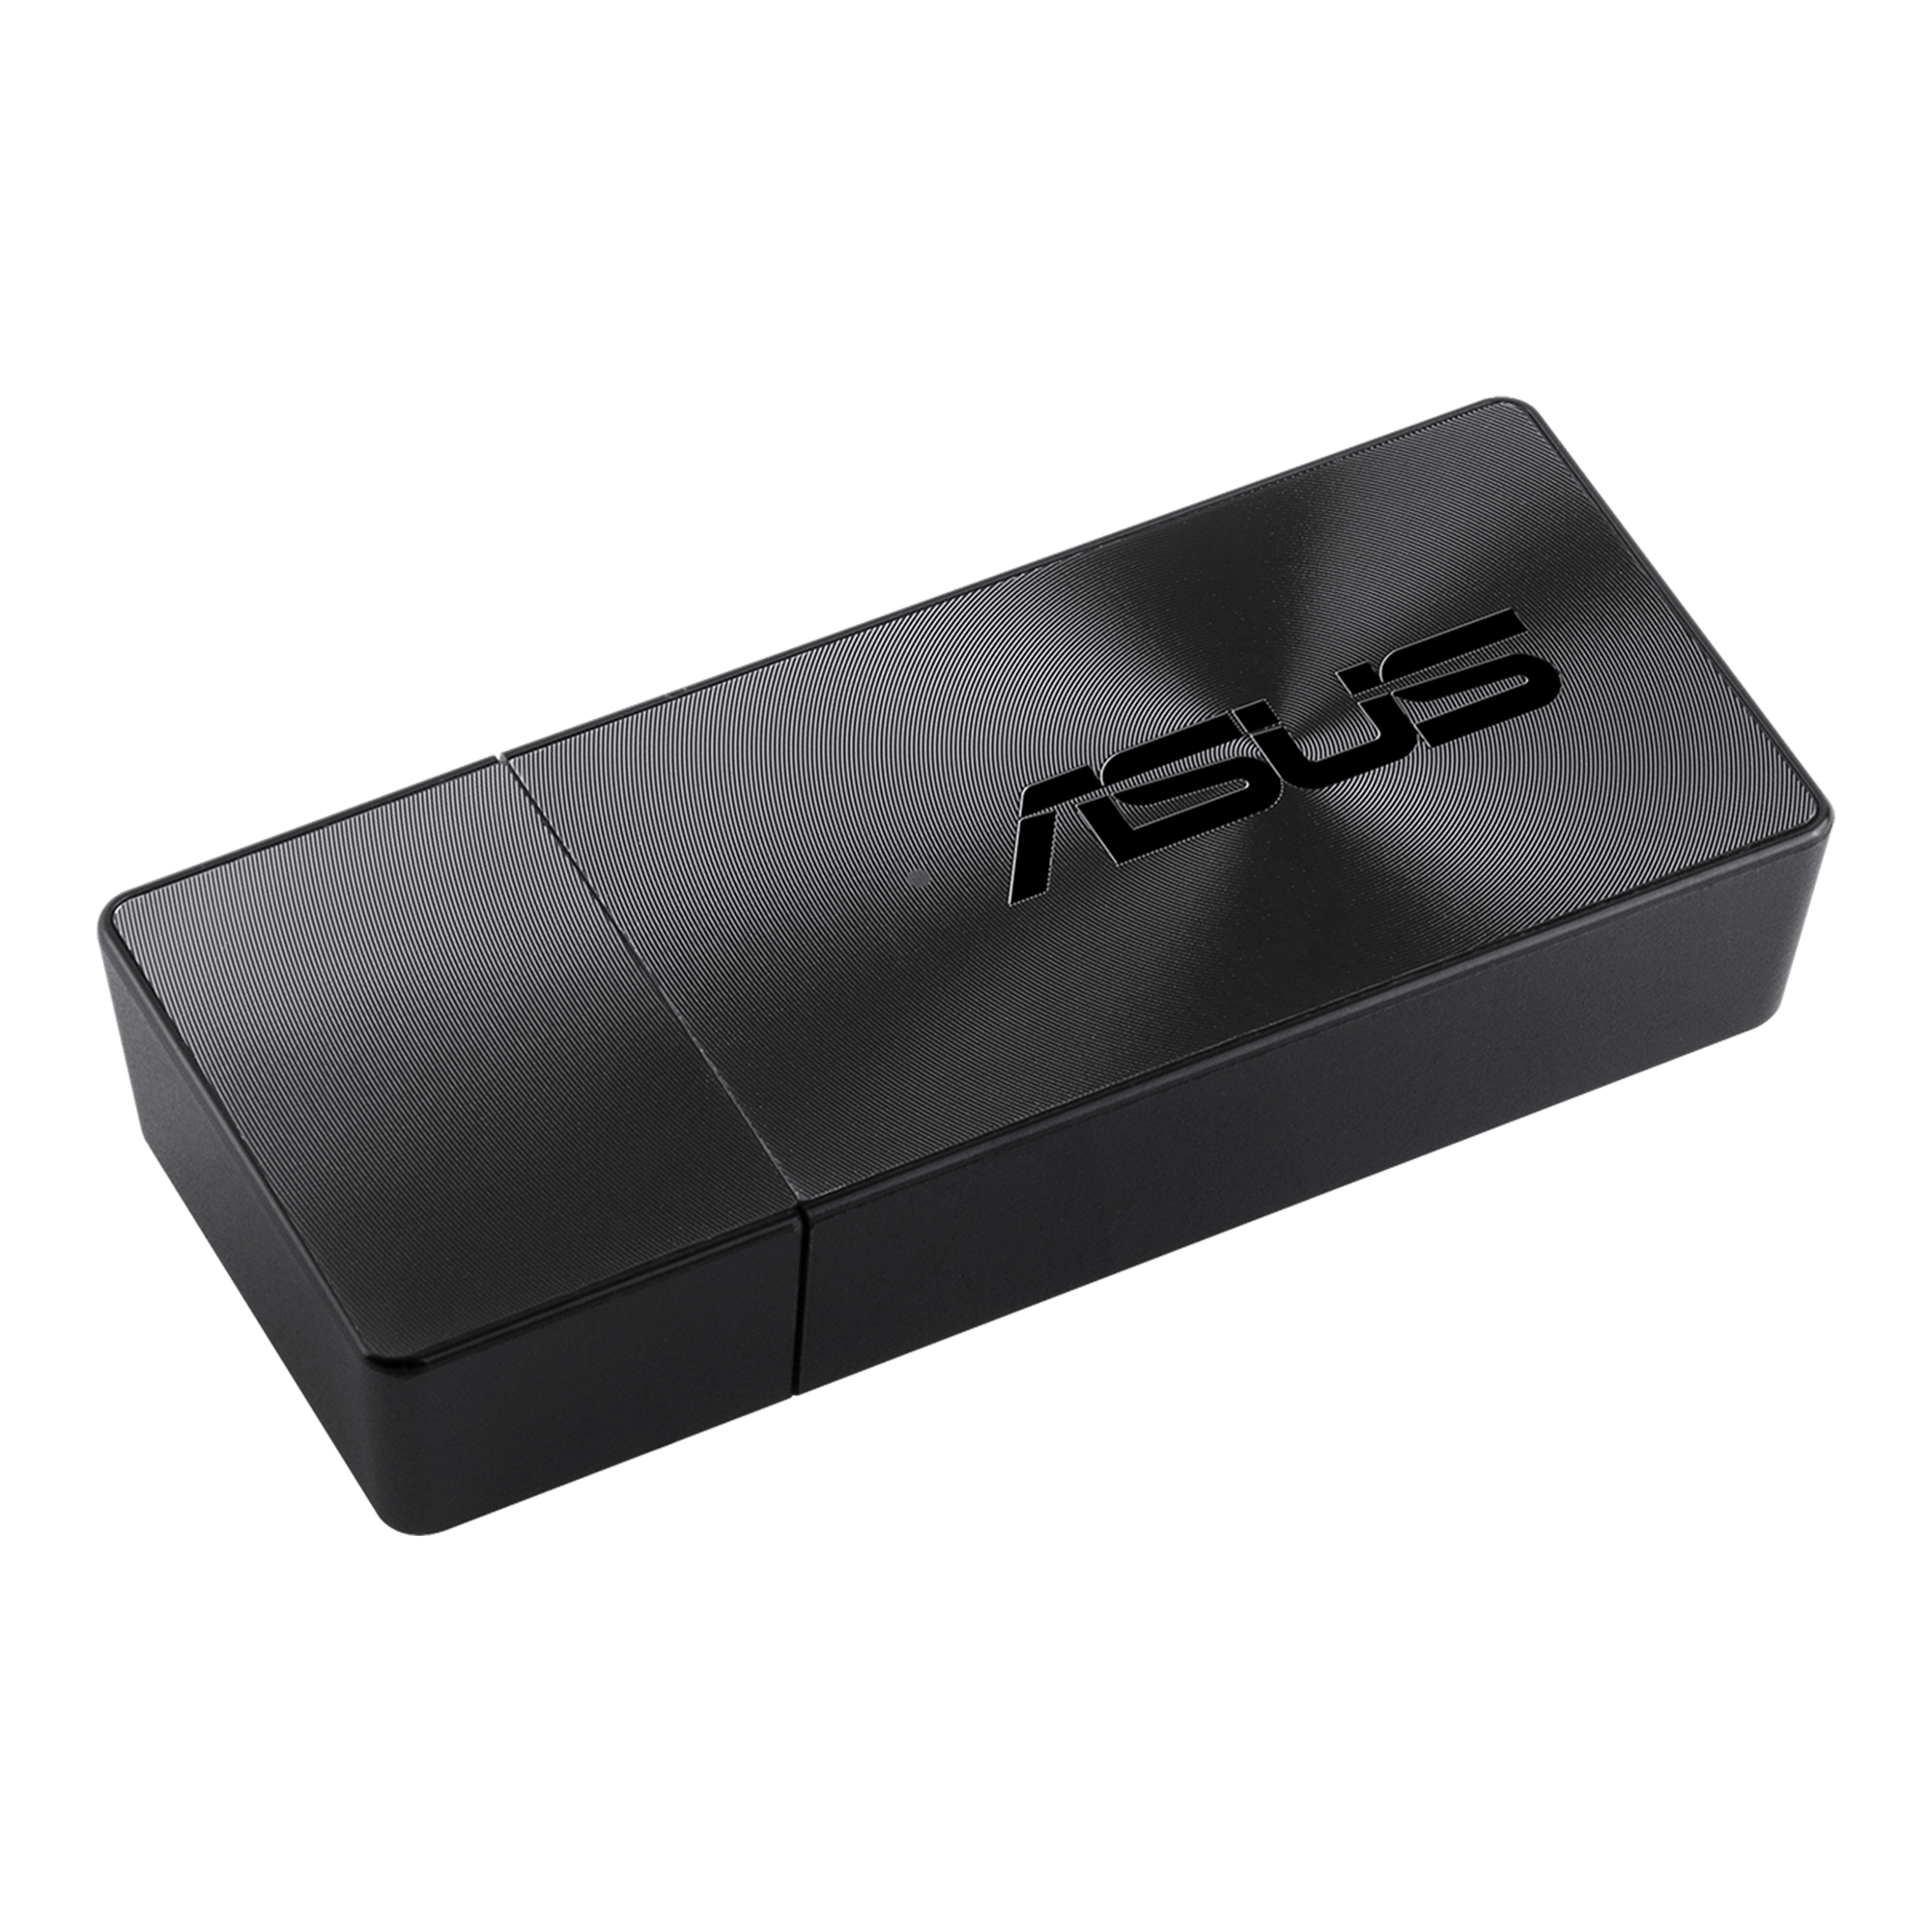 ASUS USB-AC55 B1 Kali Driver Installation - Featured